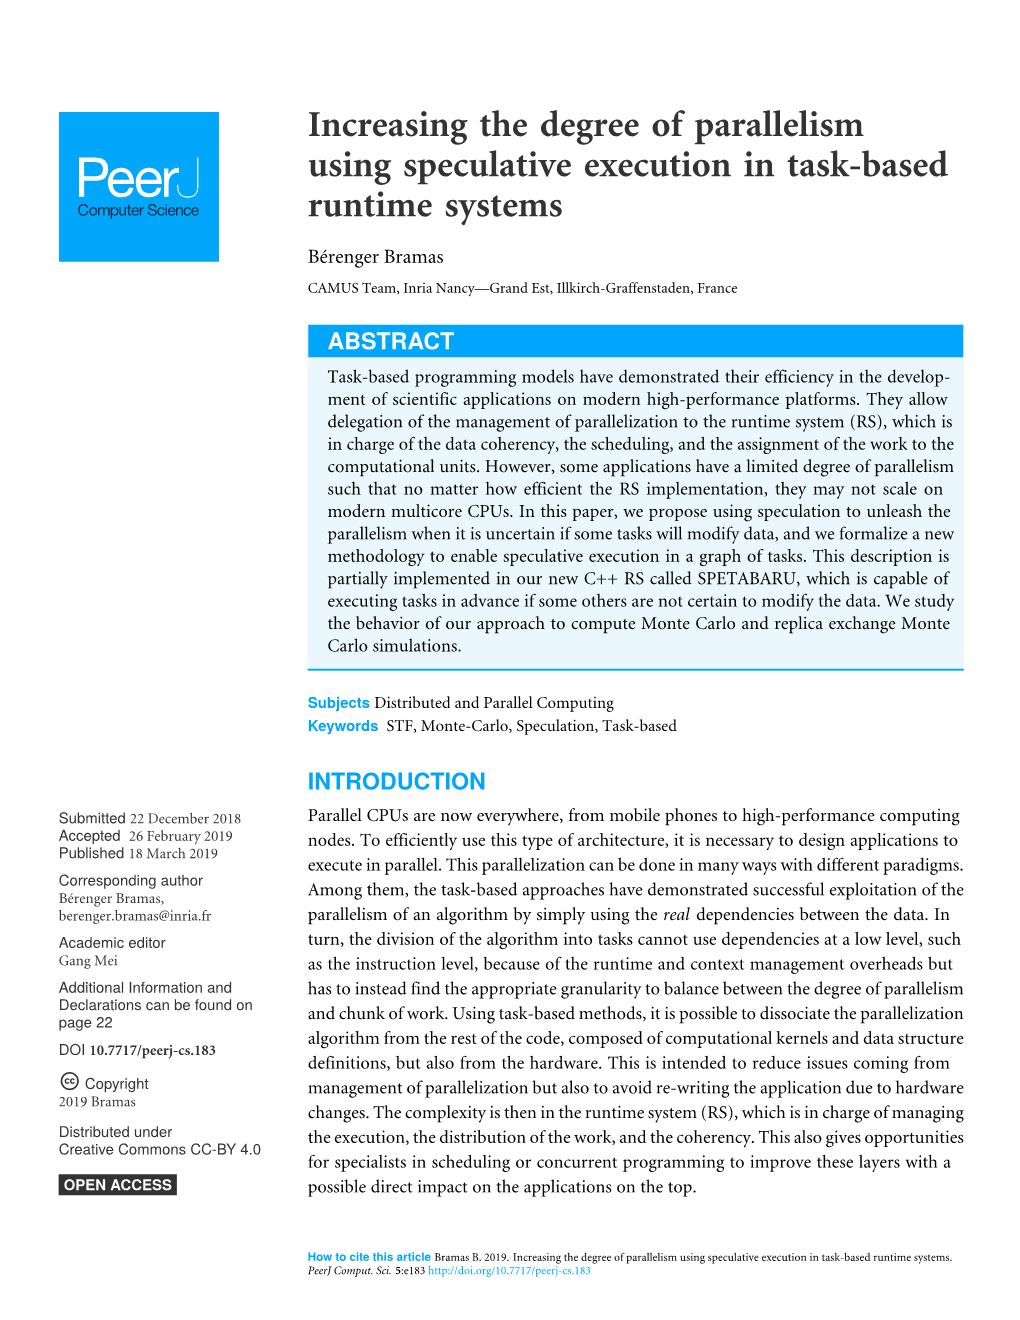 Increasing the Degree of Parallelism Using Speculative Execution in Task-Based Runtime Systems